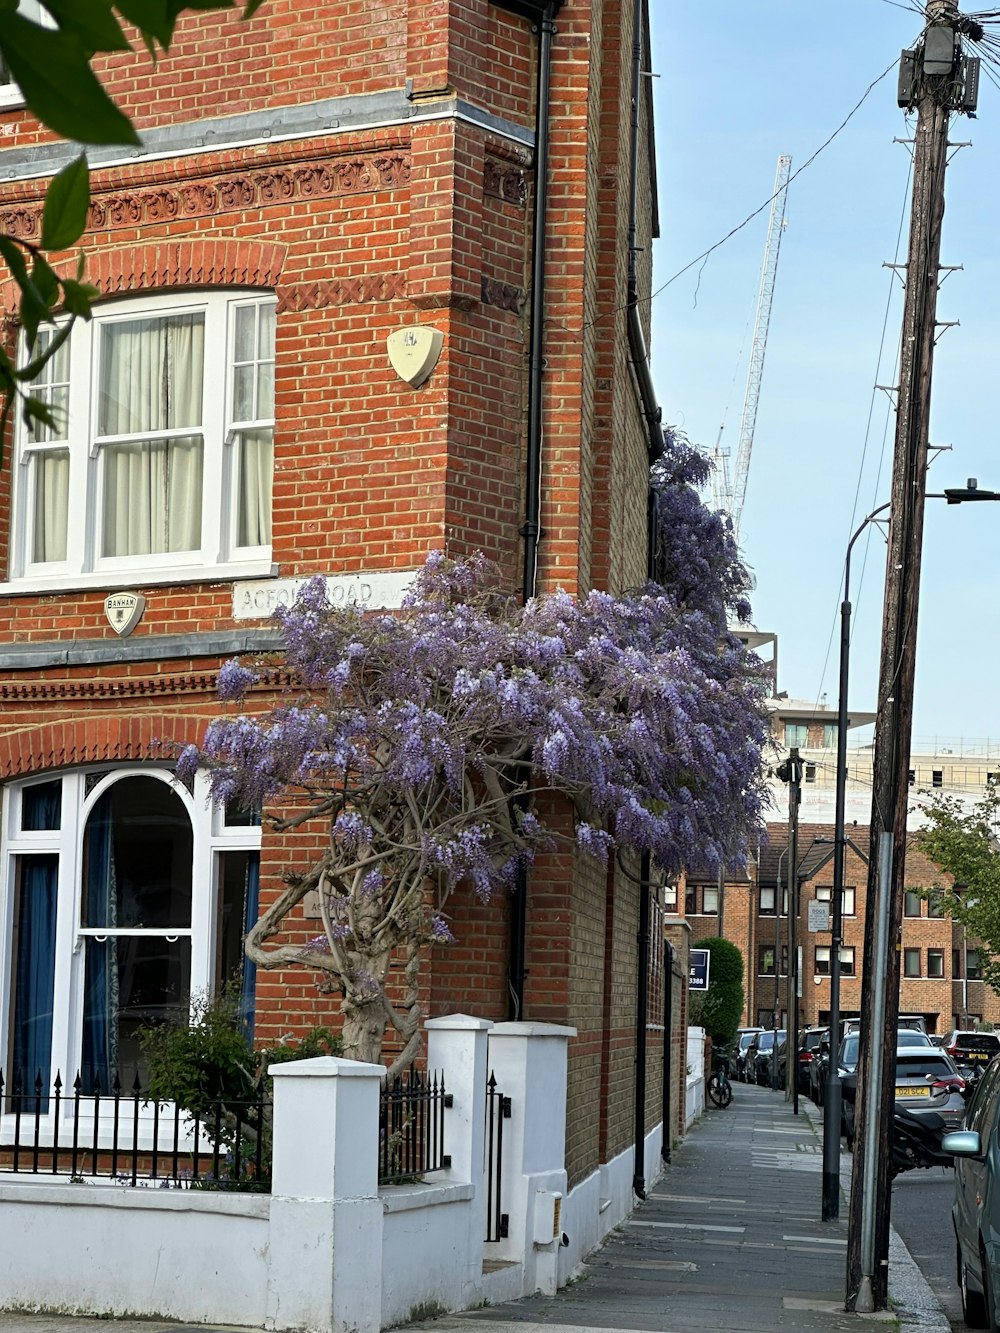 a tree with purple flowers in front of a brick building